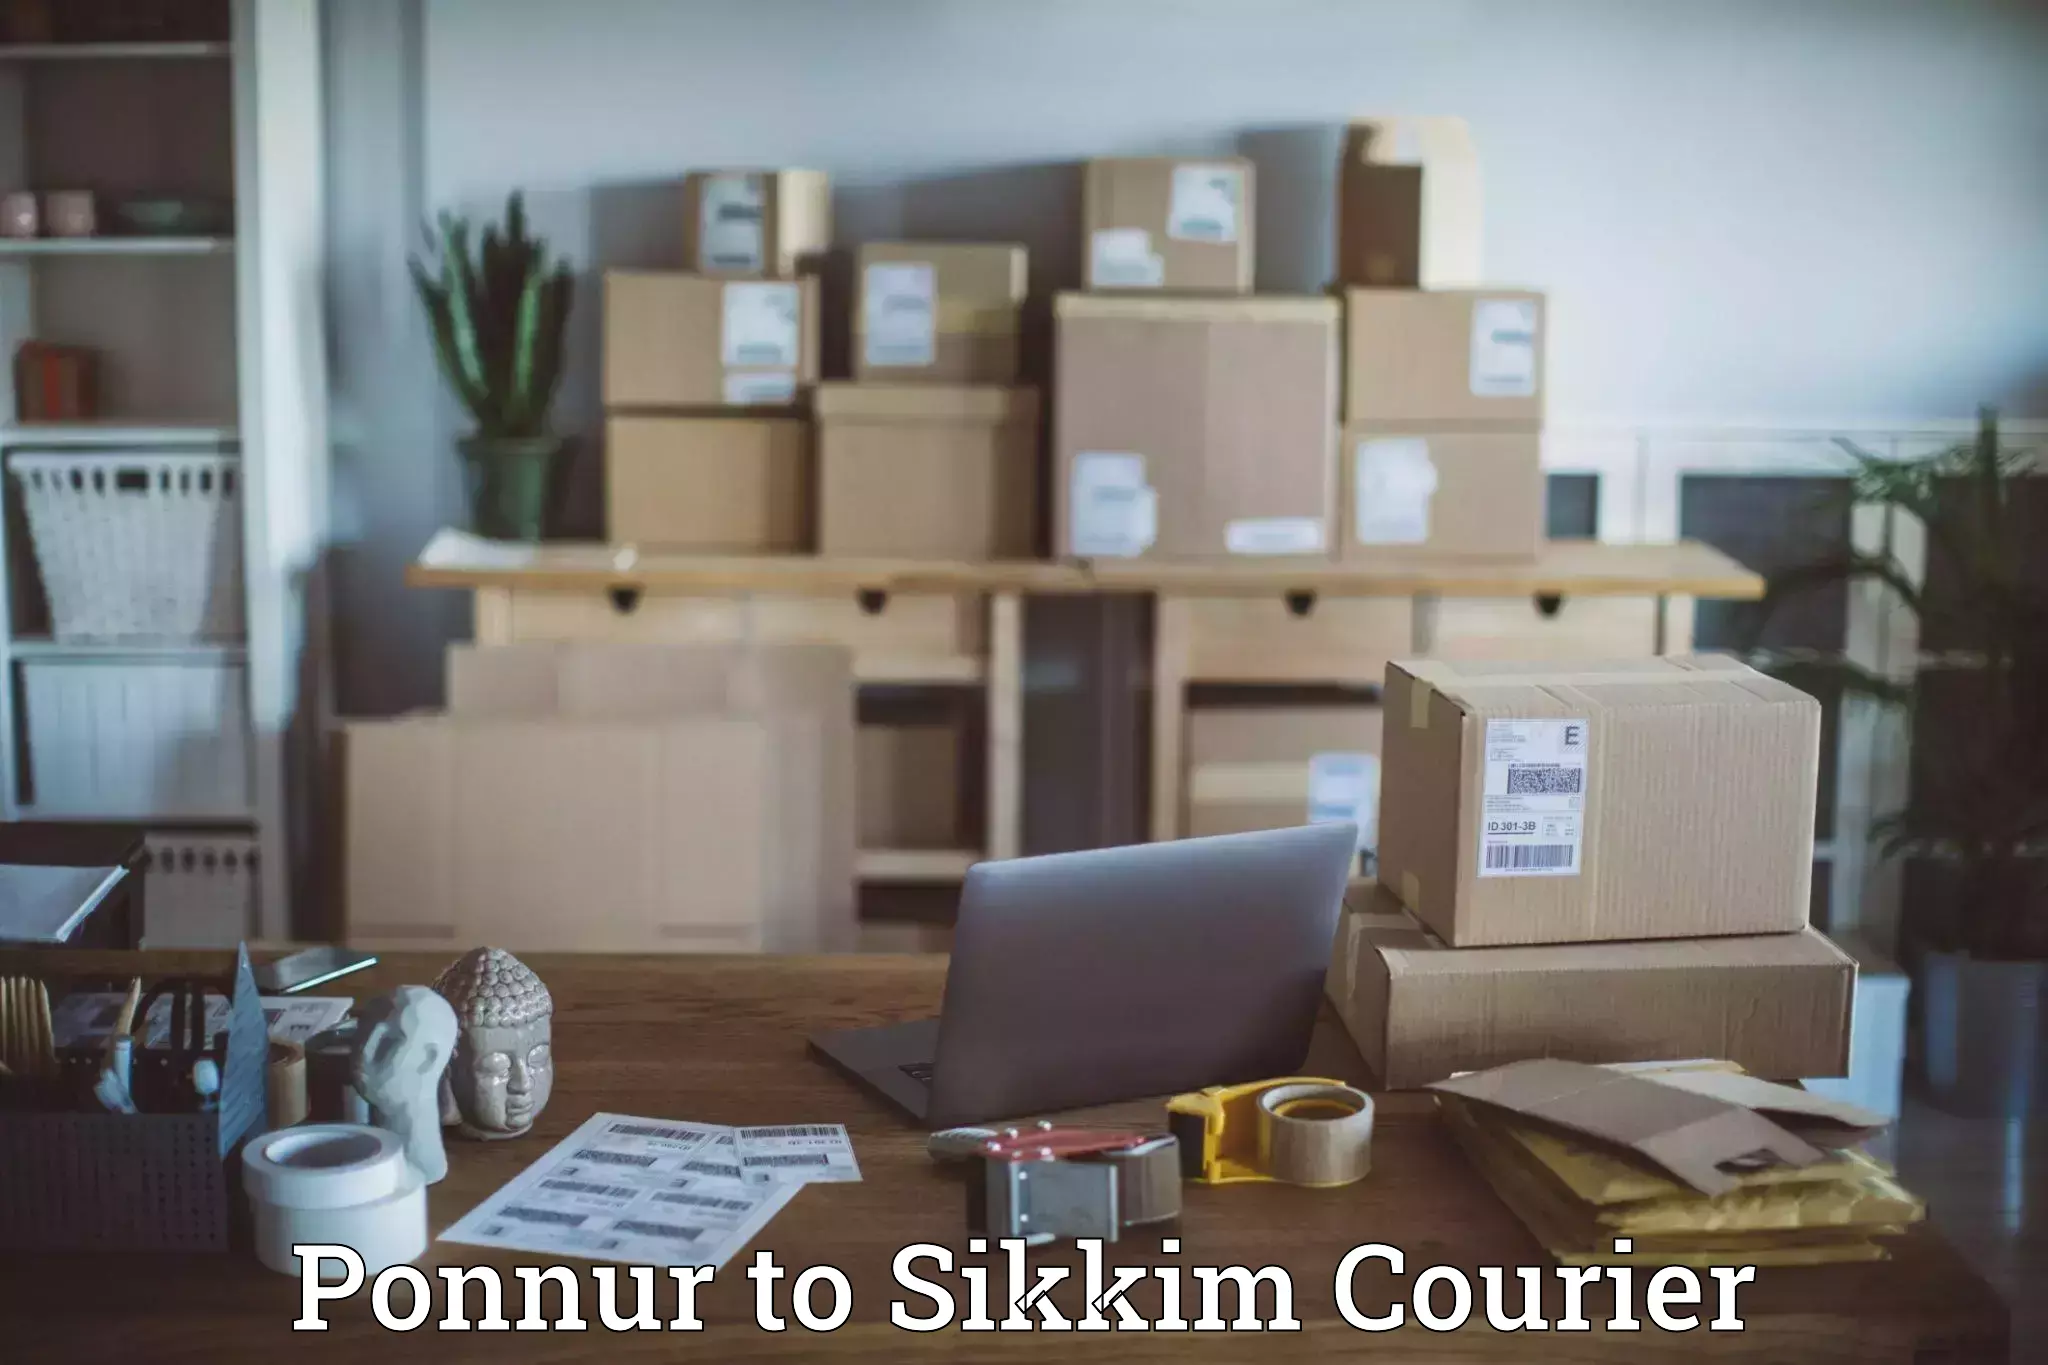 Subscription-based courier Ponnur to North Sikkim